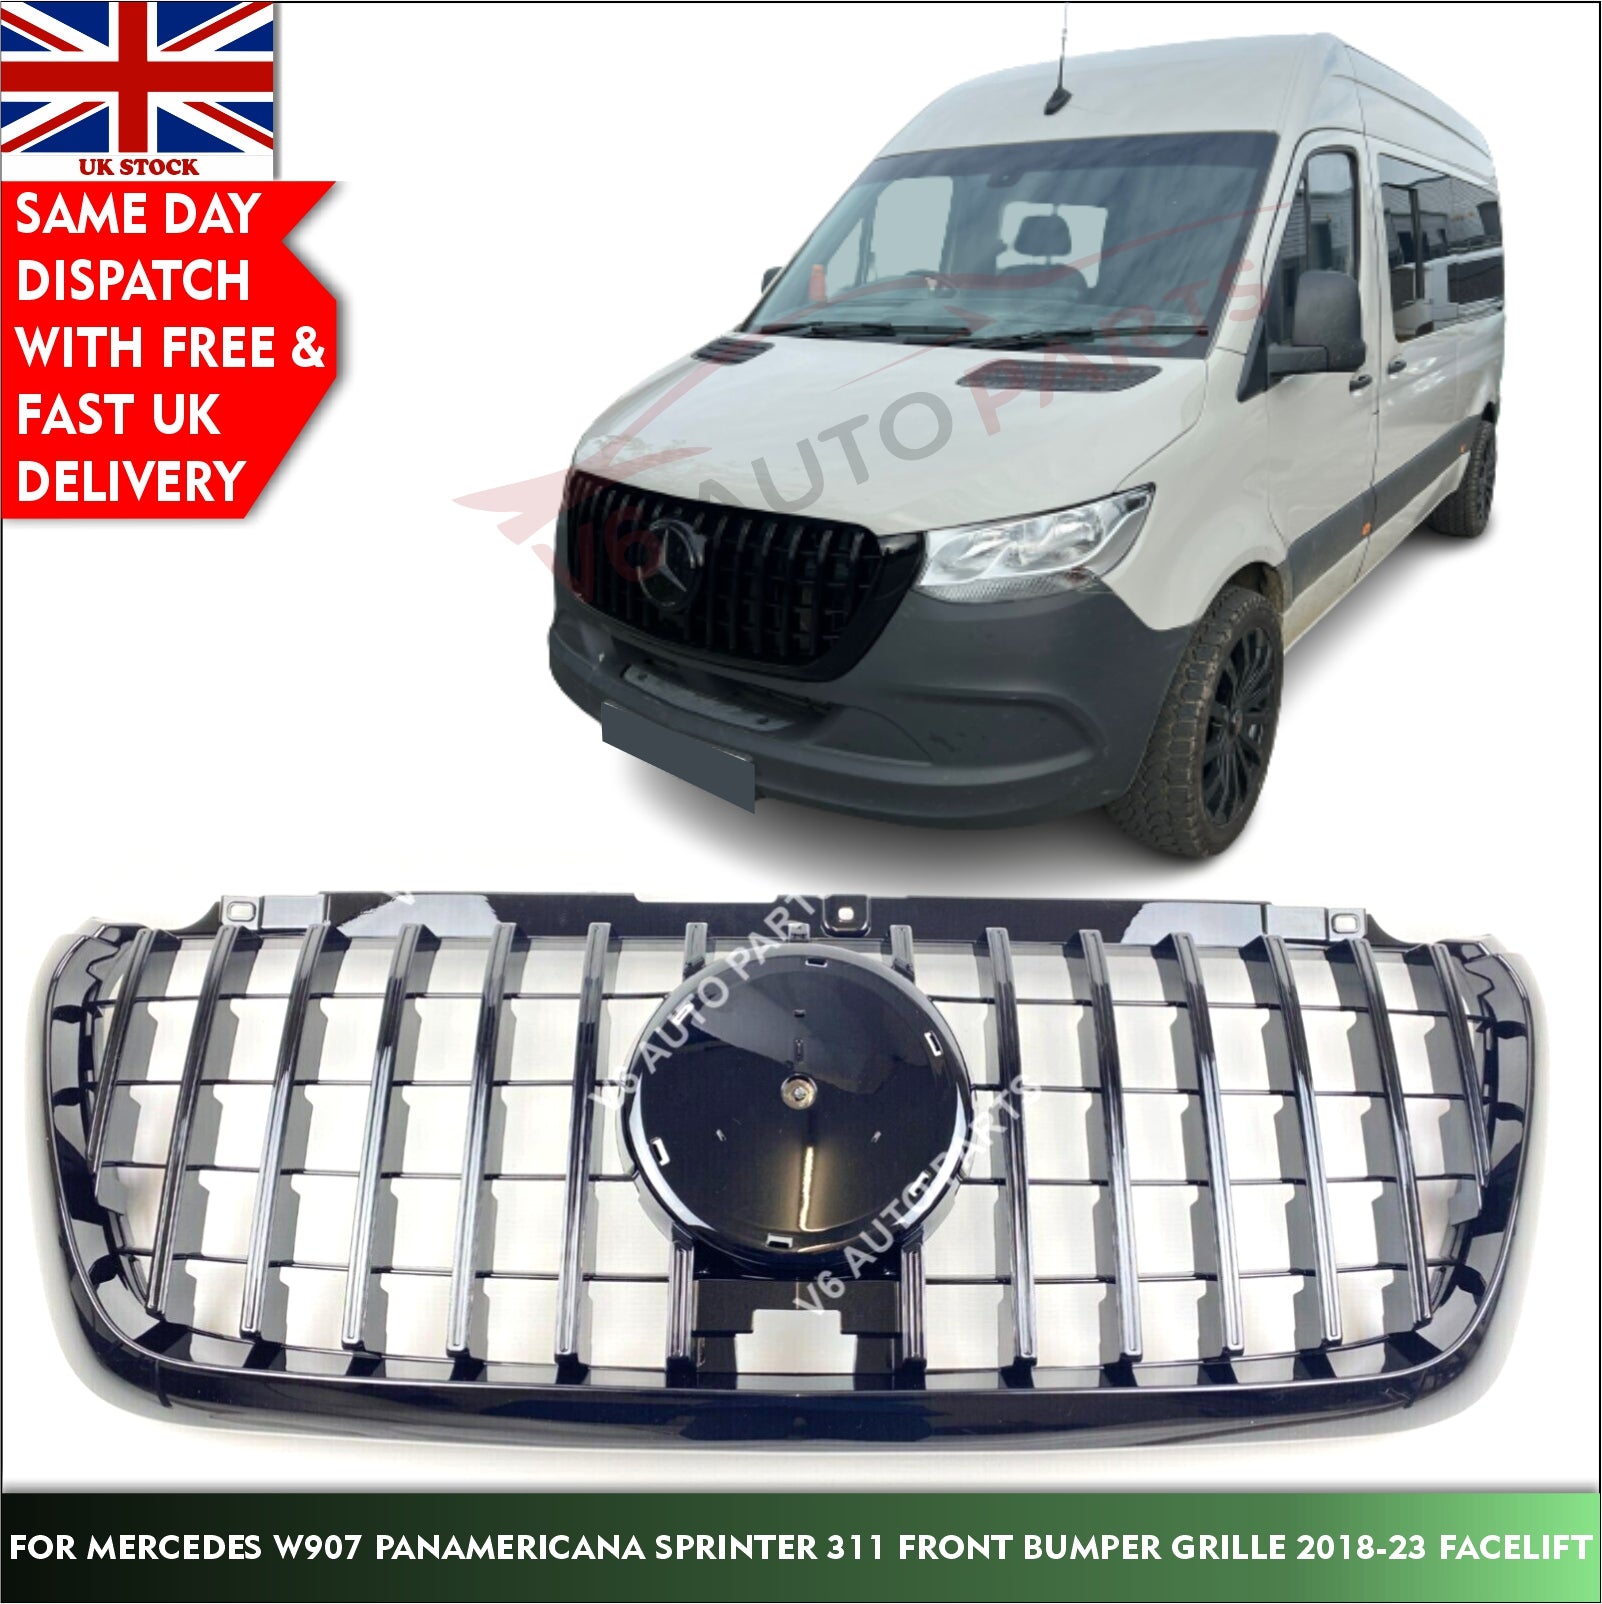 For Mercedes W907 Panamericana Sprinter 311 Front Bumper Grille 2018-23 Facelift